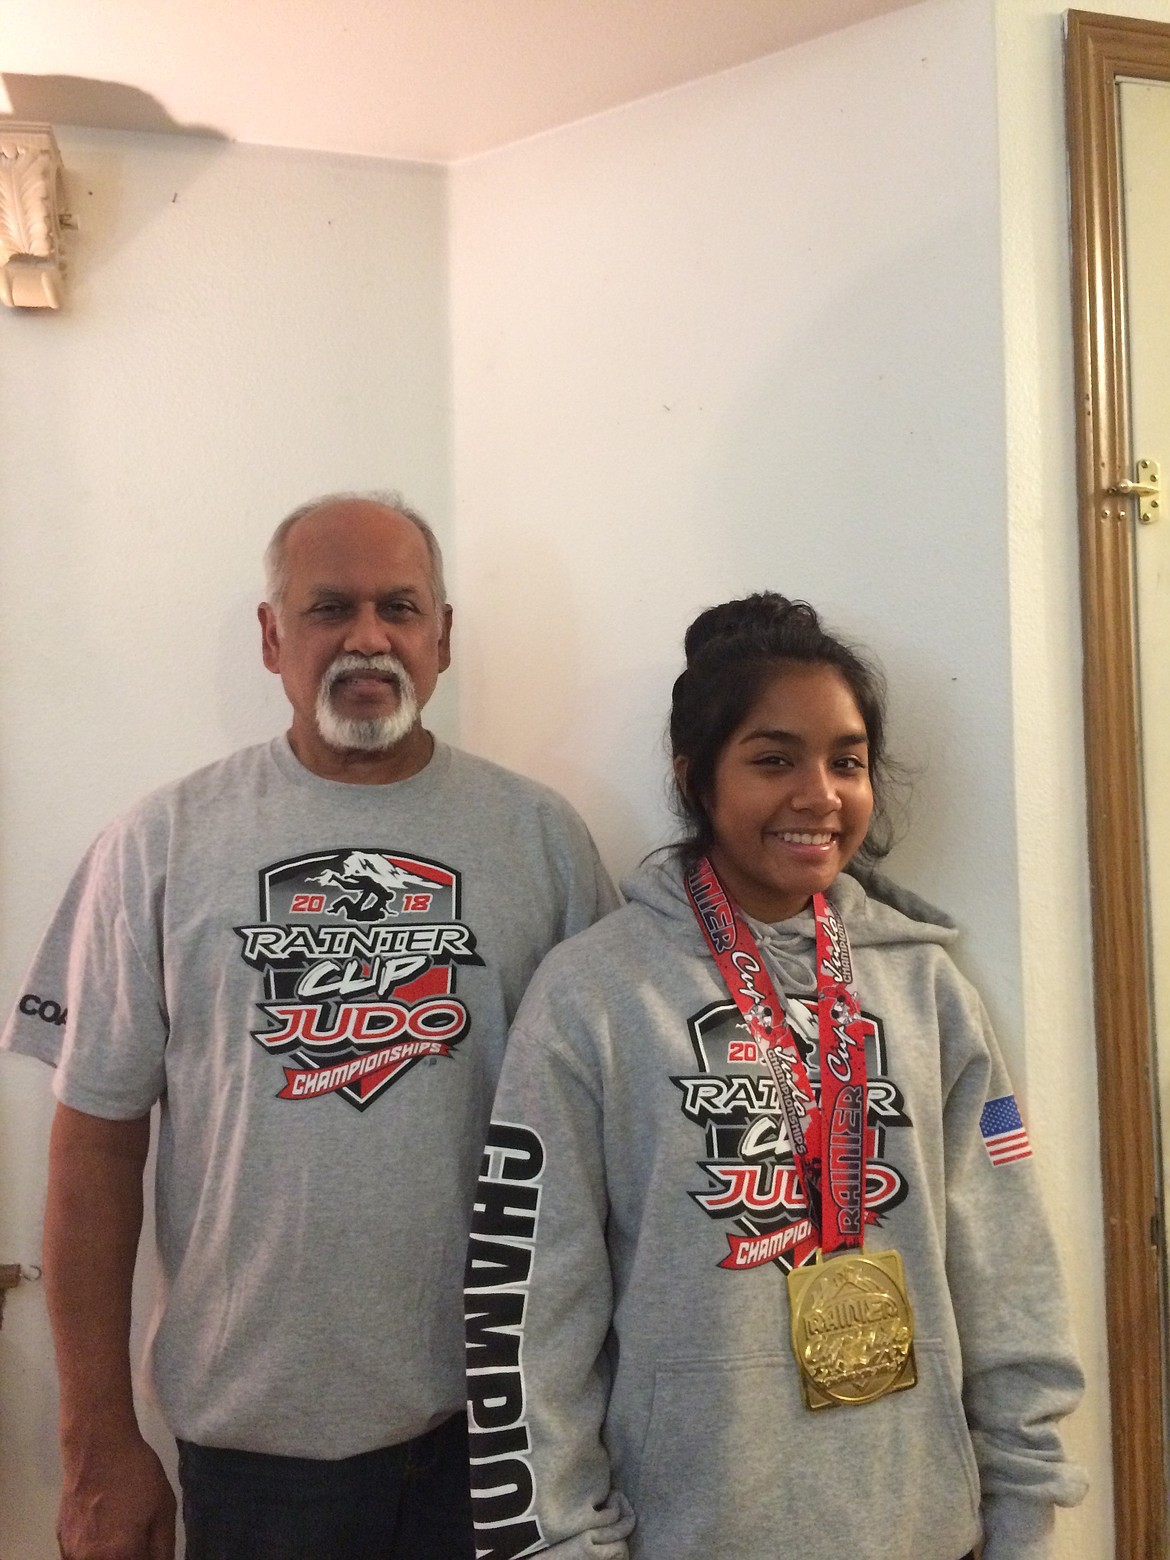 Courtesy photo
Goshinjitsu Martial Art School at Forge Fitness Center in Post Falls competed in the 2018 Rainier Cup Judo Championship in Lakewood, Wash., on Oct. 20. At right is Raji Singh, gold medal winner, pictured with her coach Bijay Singh.